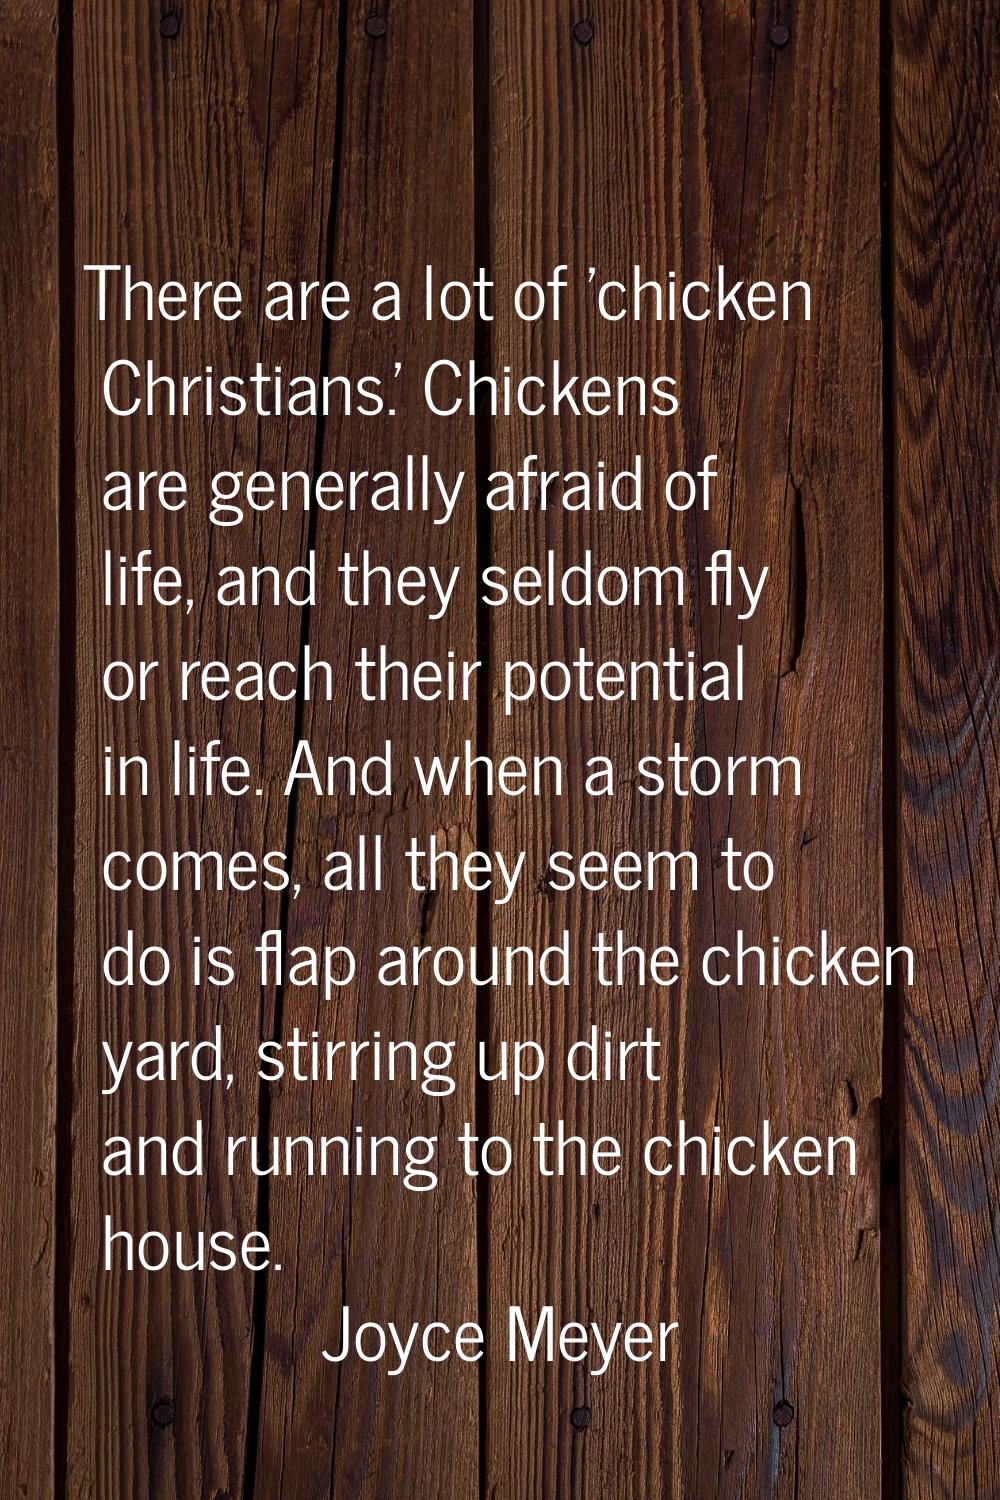 There are a lot of 'chicken Christians.' Chickens are generally afraid of life, and they seldom fly